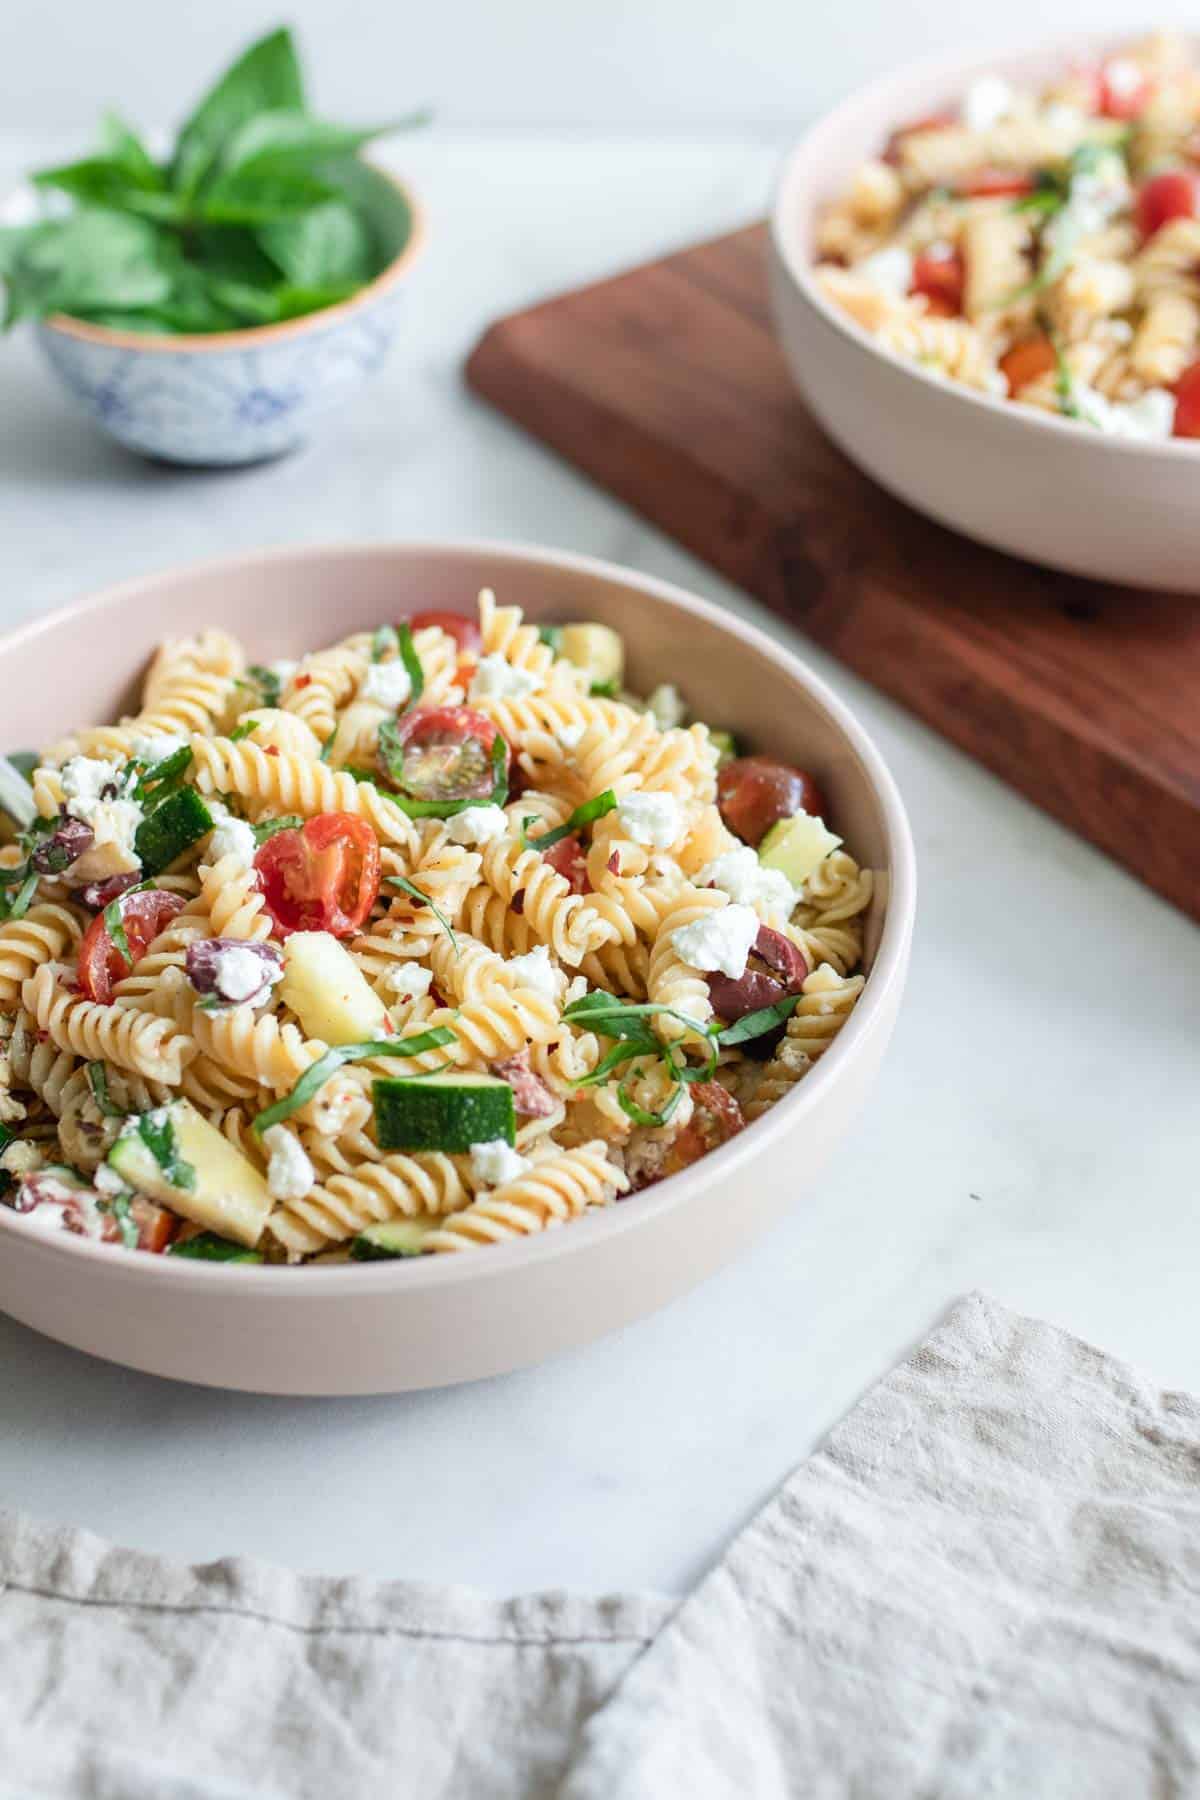 Two bowls of vegetable pasta salad topped with zucchini and tomatoes.